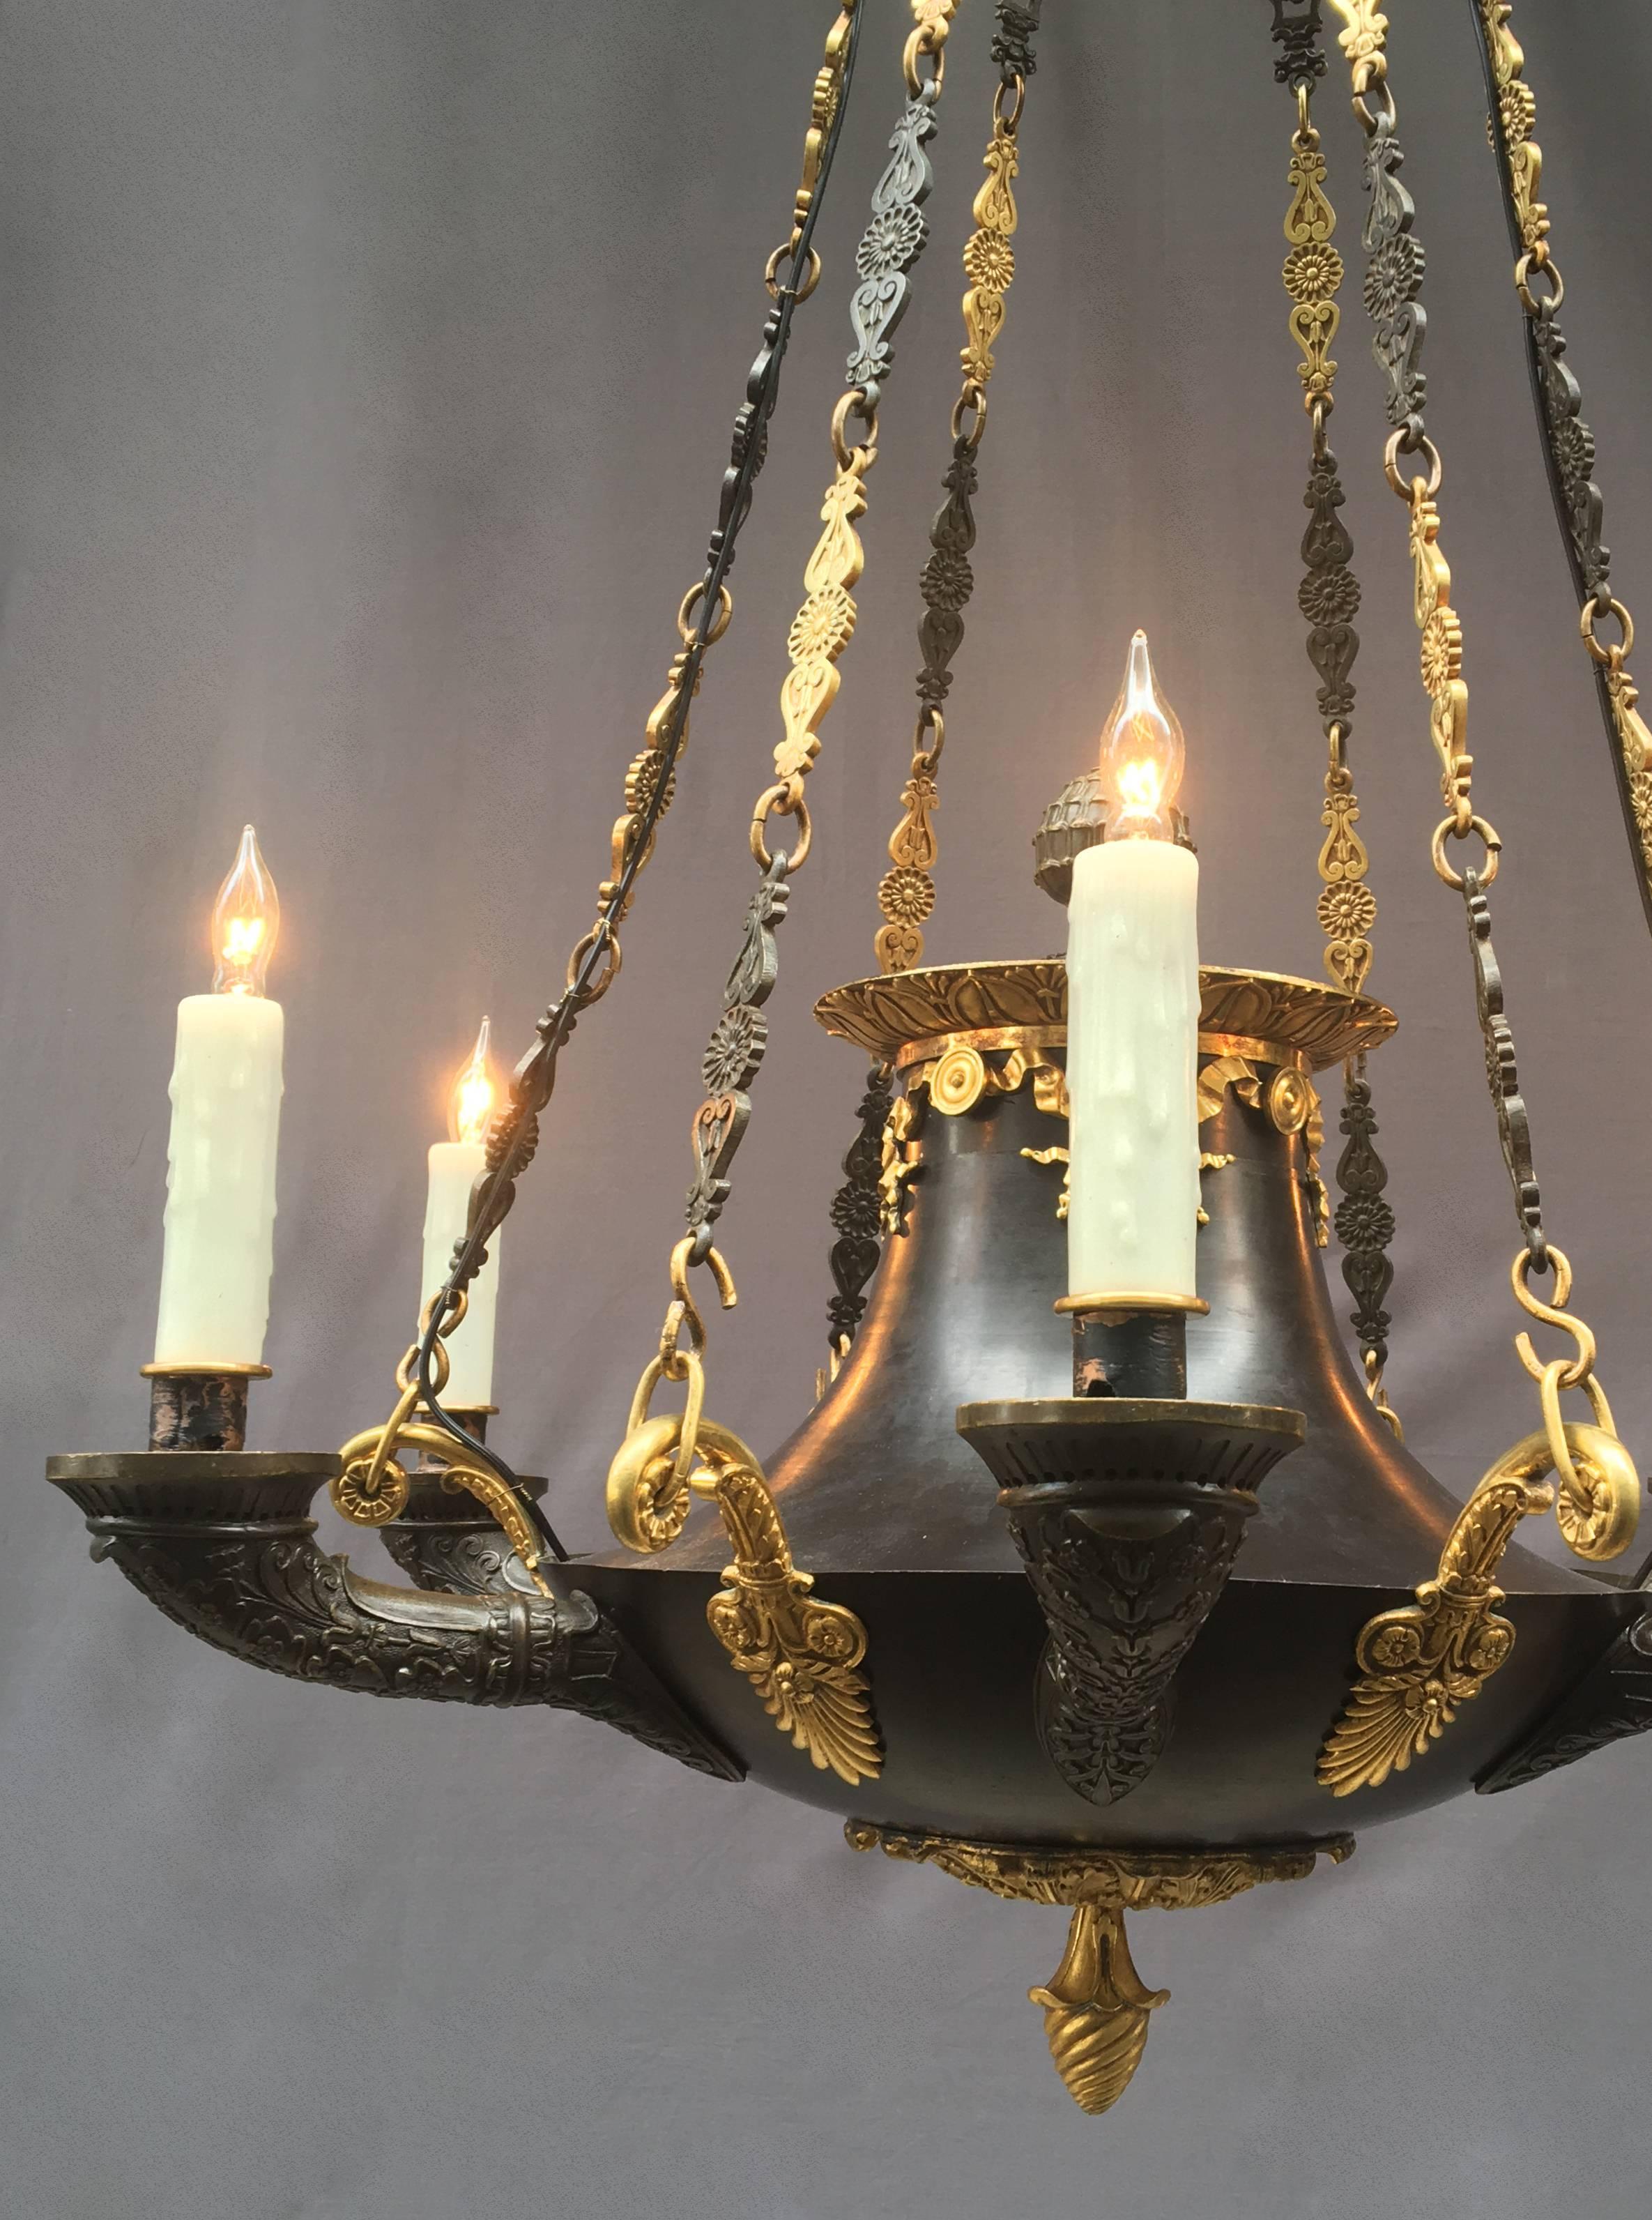 1830s patinated bronze and ormolu candle chandelier. This chandelier is an important piece of Texas history being deaccessioned from the Bayou Bend Collection. The chandelier originally hung in the Chillman Parlor in Bayou Bend assembled by Miss.